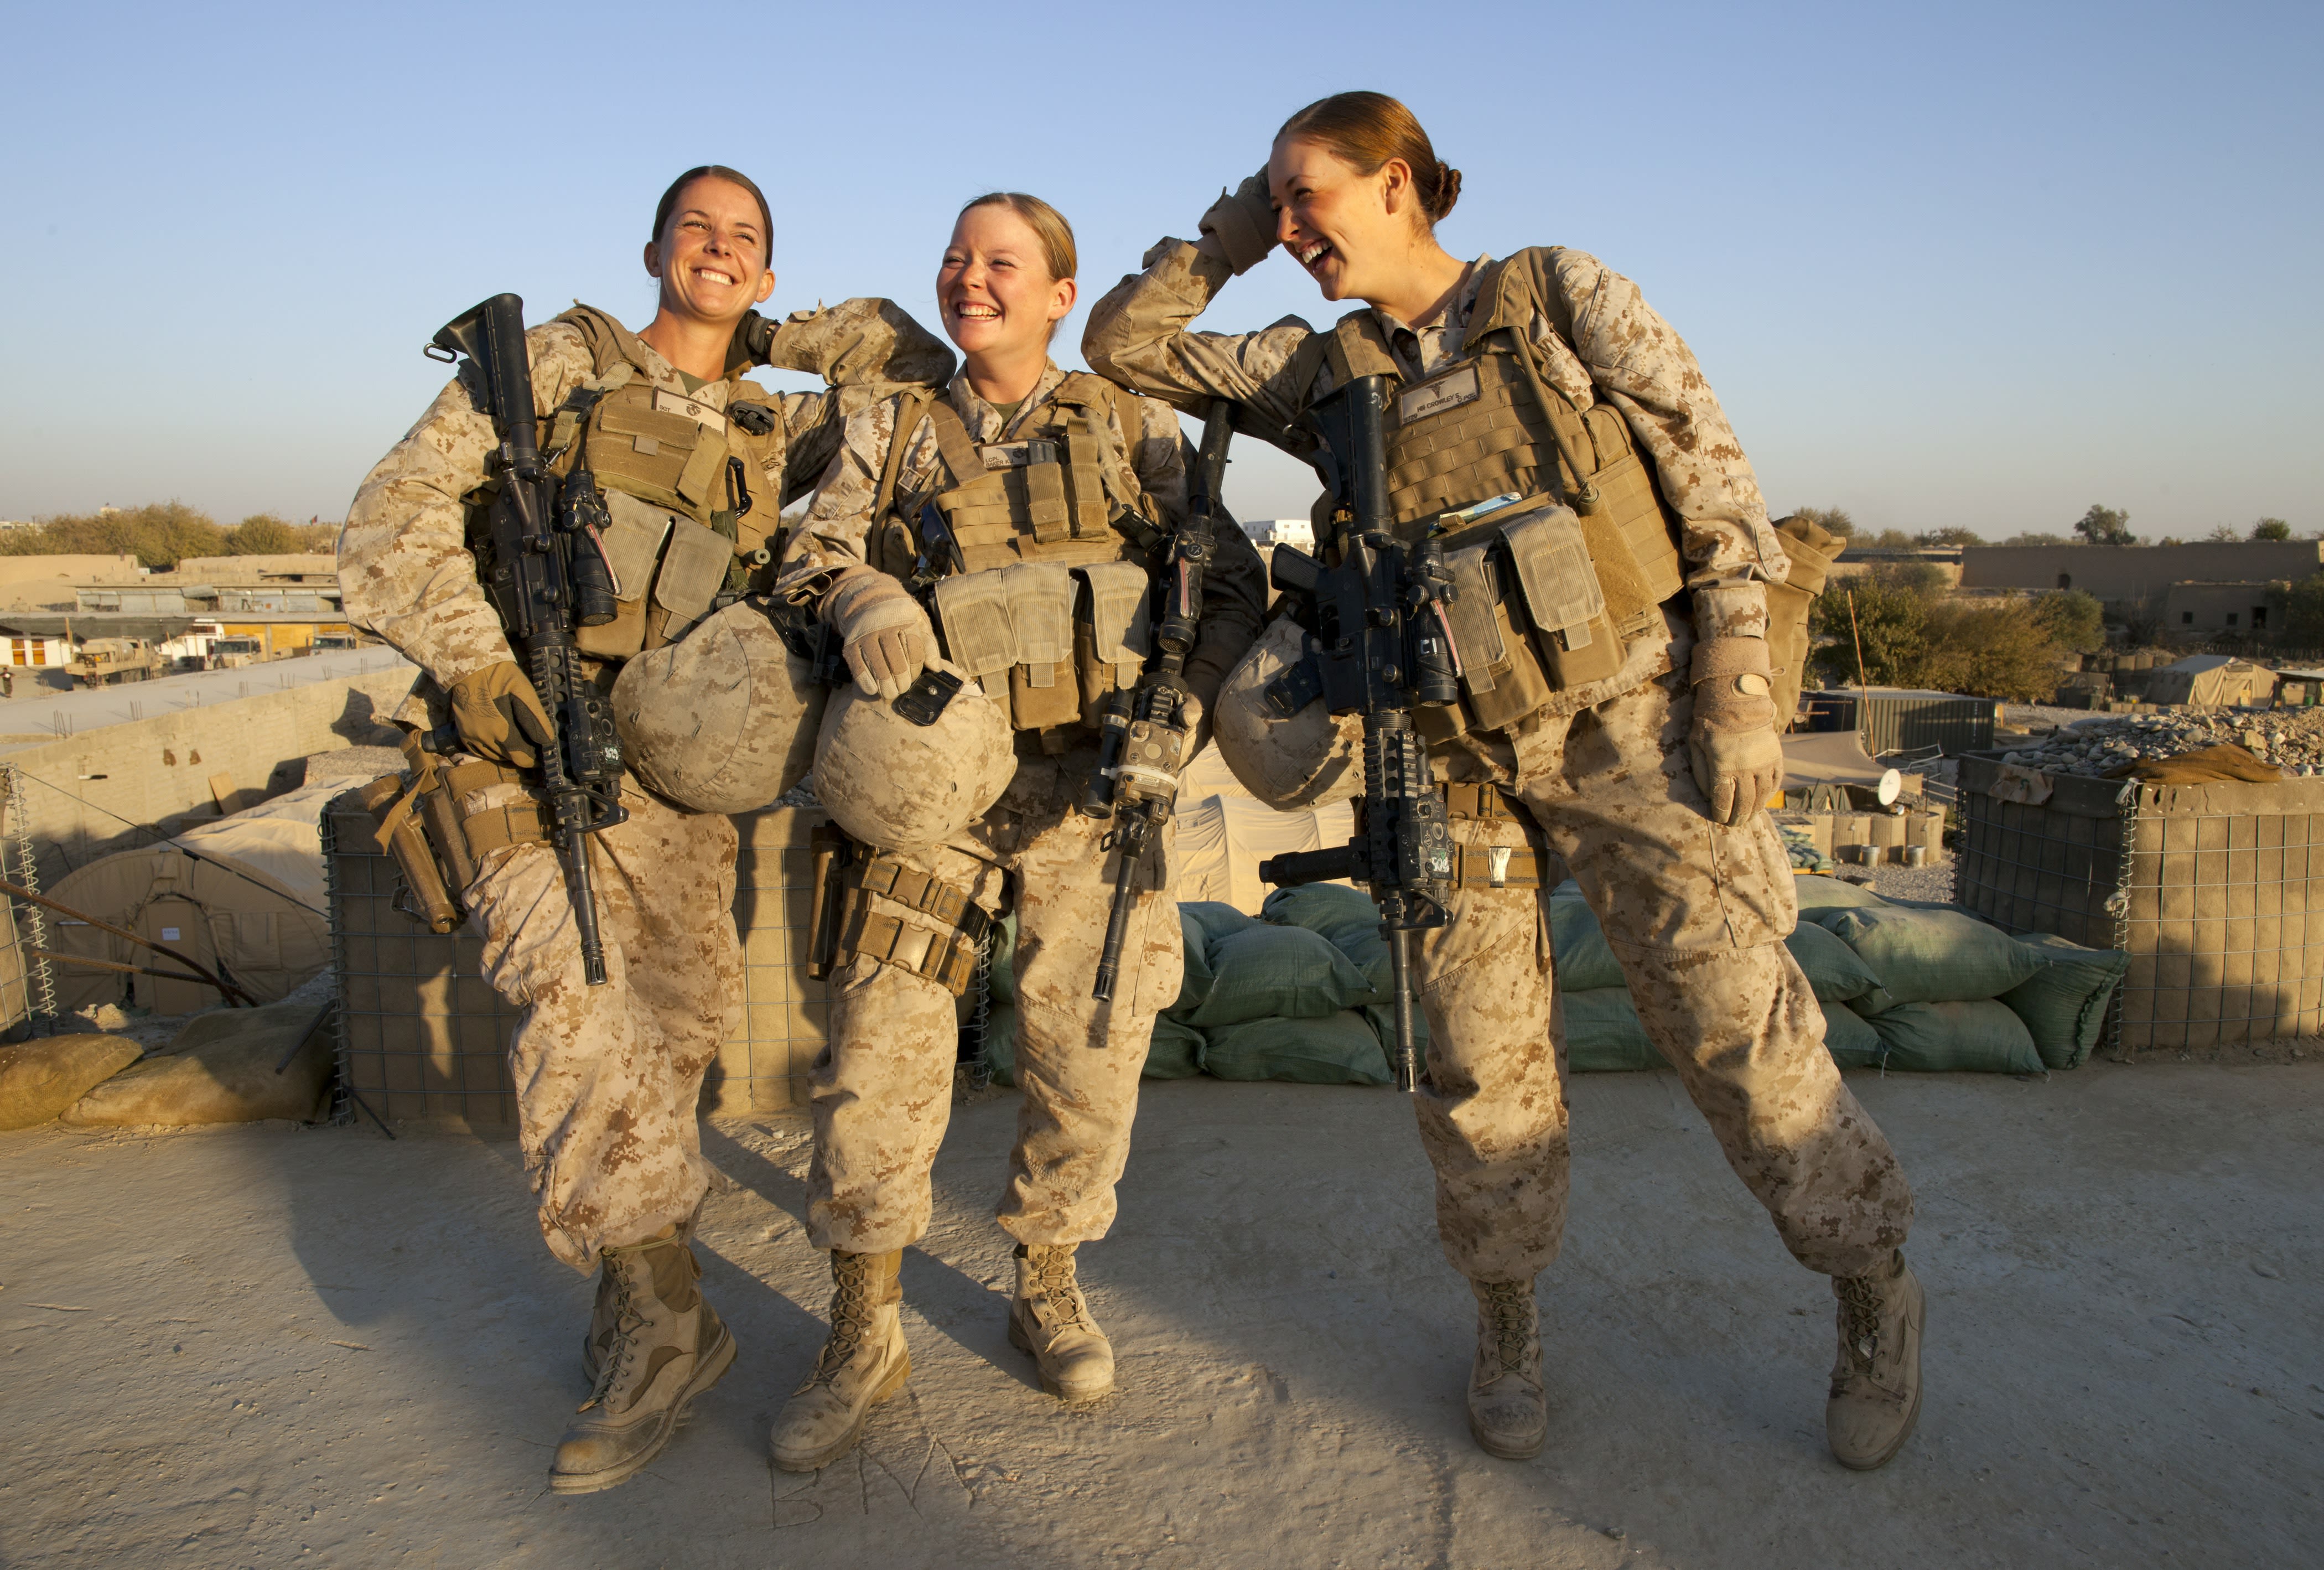 All Military Combat Roles Open to Women